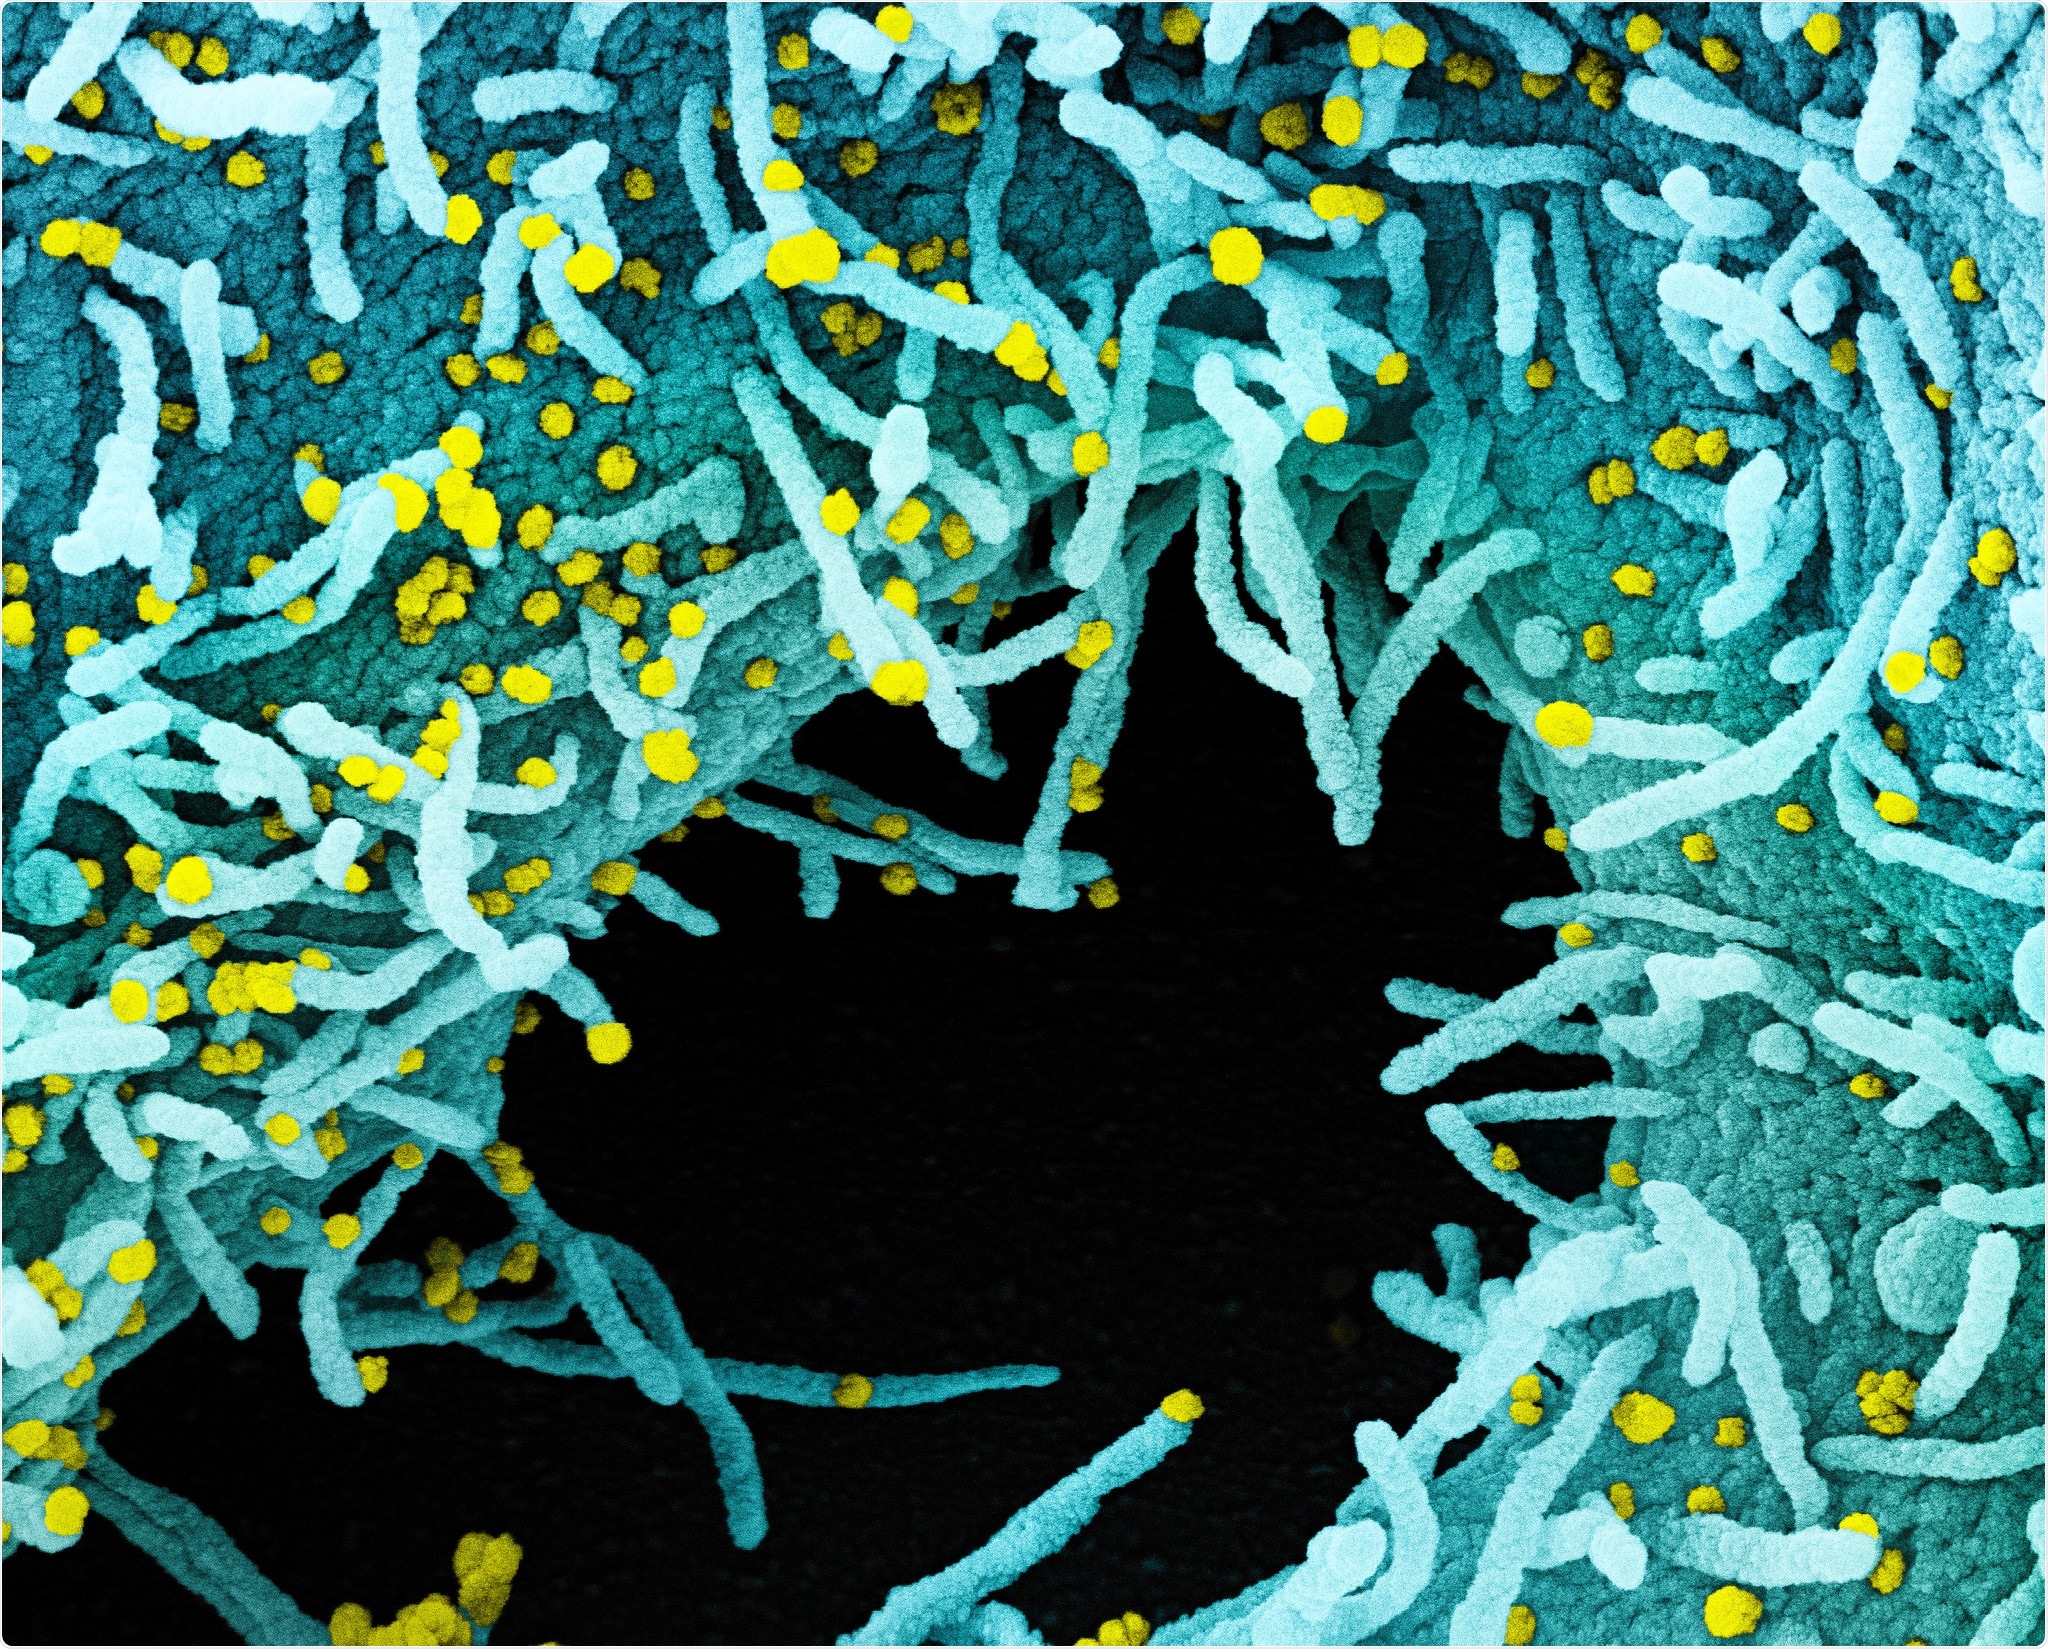 Colorized scanning electron micrograph of a cell heavily infected with SARS-CoV-2 virus particles (yellow), isolated from a patient sample. The black area in the image is extracellular space between the cells. Image captured at the NIAID Integrated Research Facility (IRF) in Fort Detrick, Maryland. Credit: NIAID